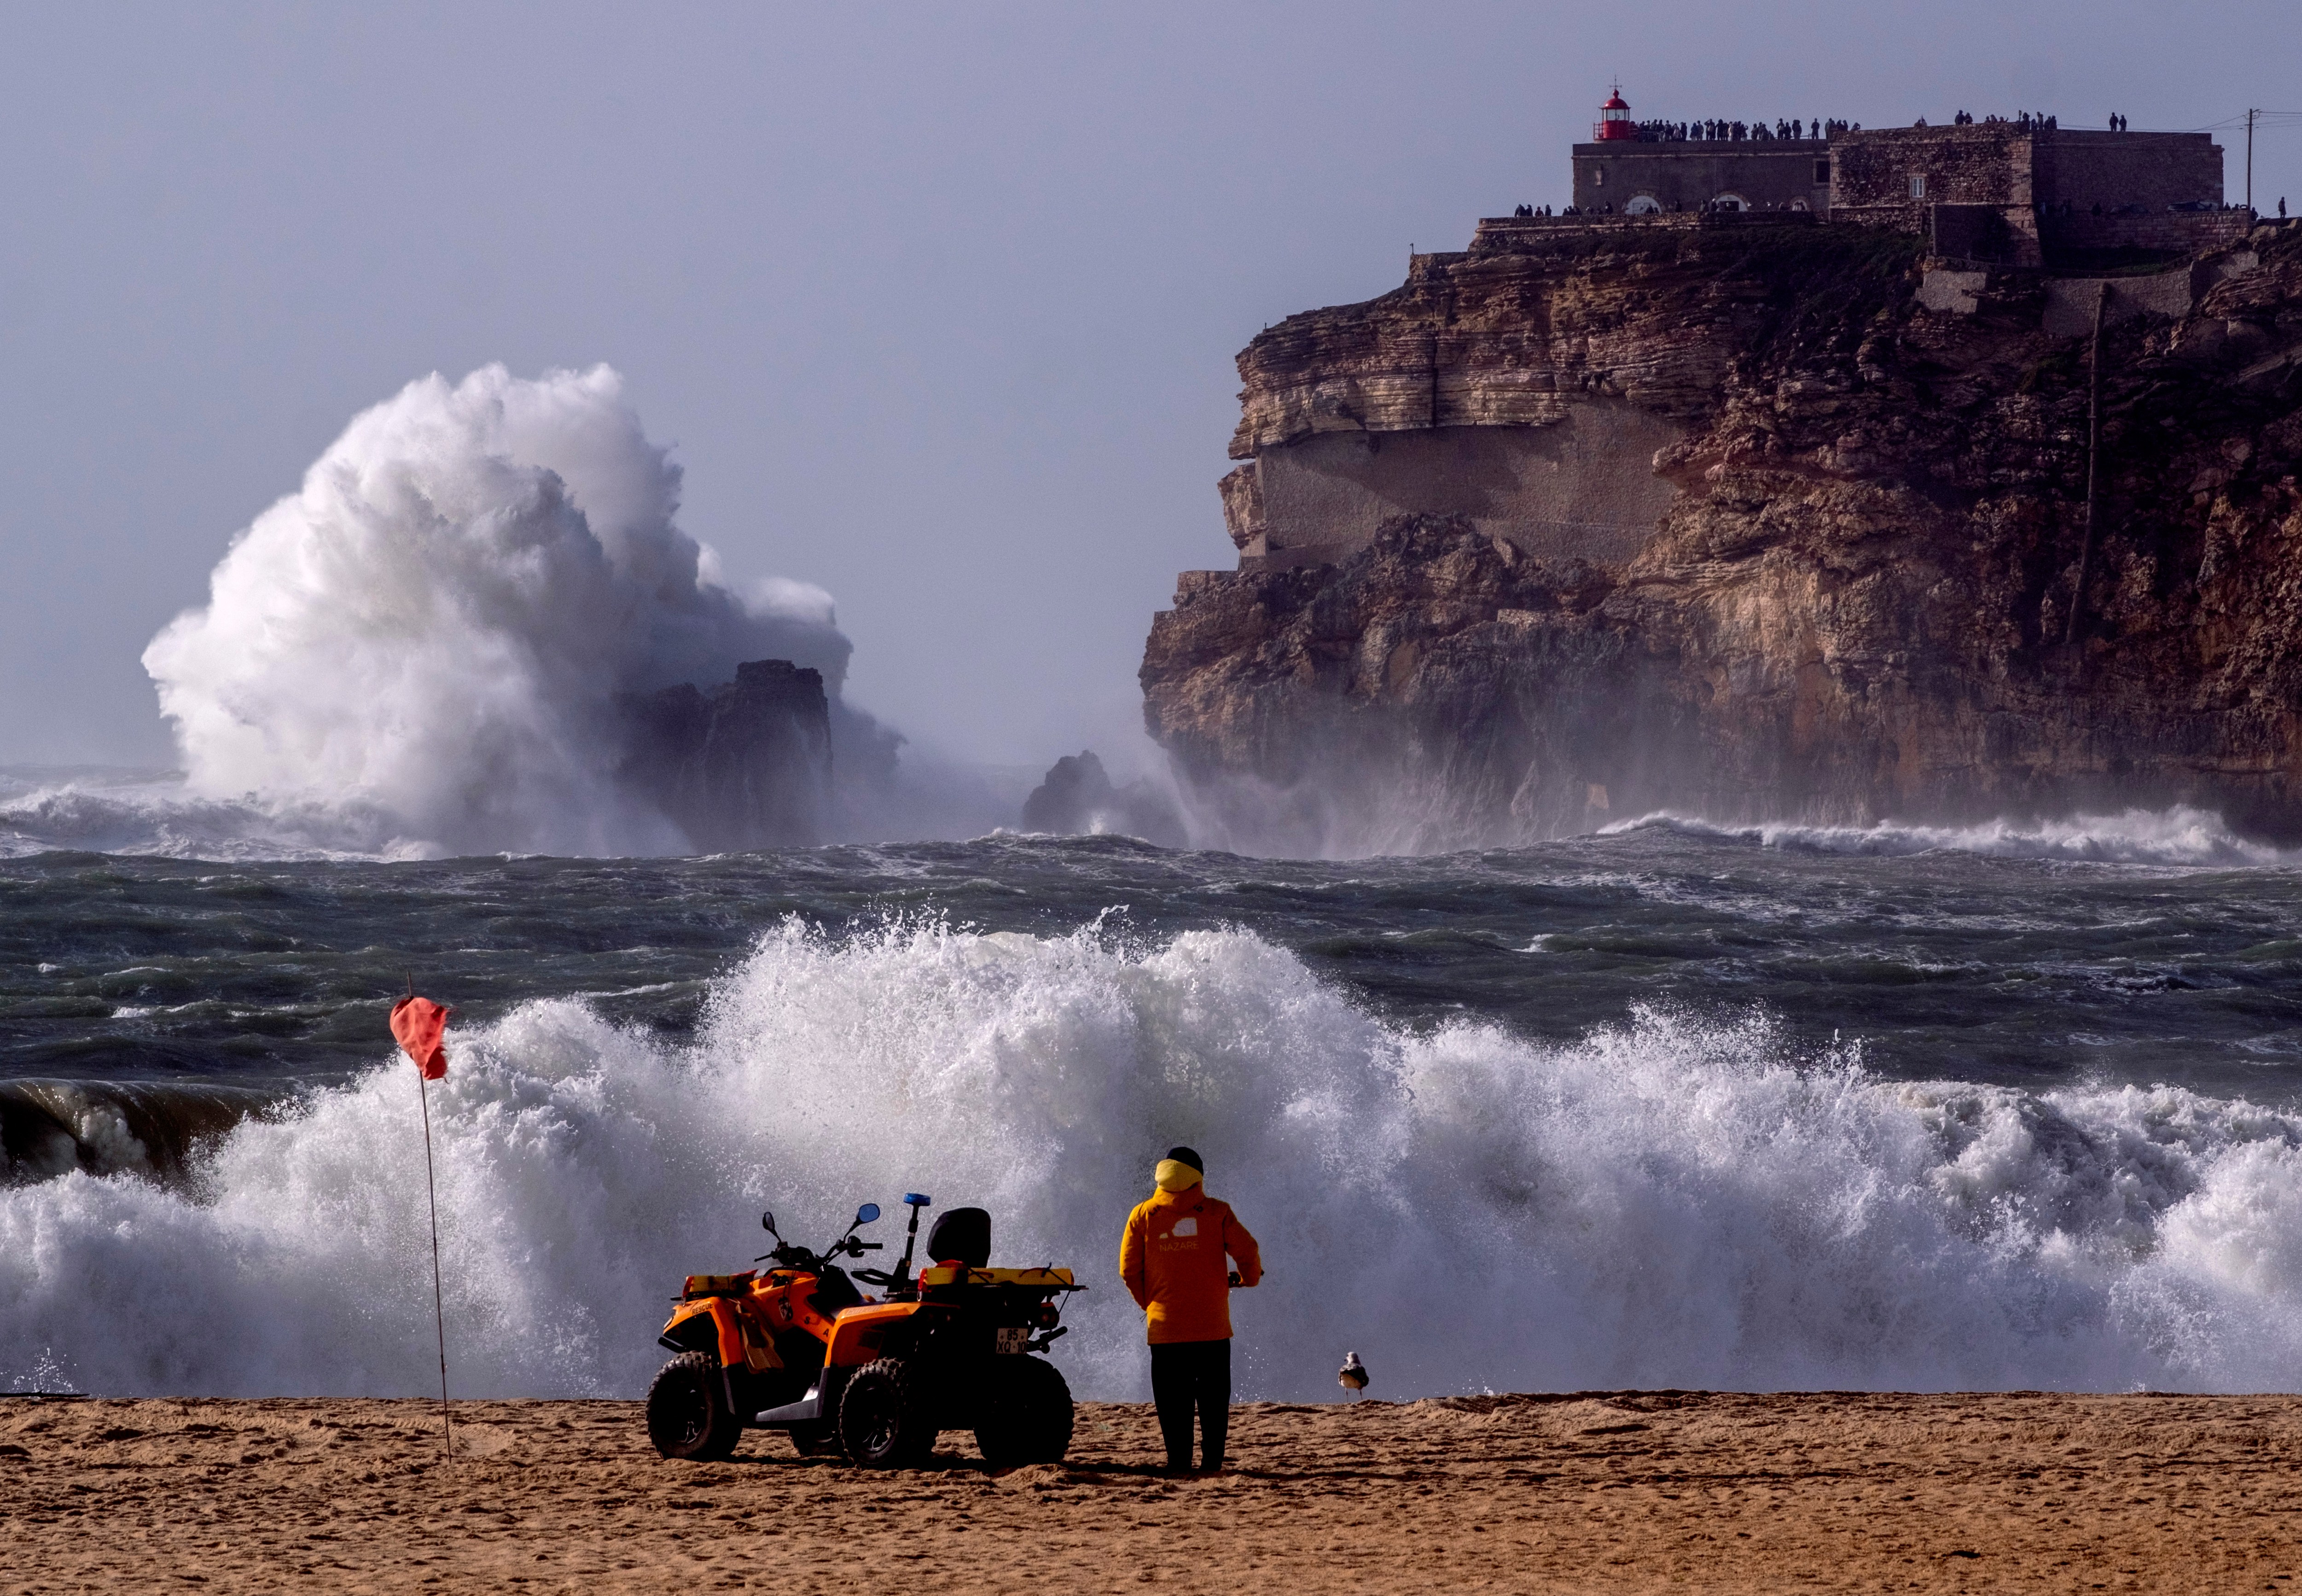 Strong winds whipped up the sea at Nazare, Portugal, a popular surfing spot. Further wind and rain are expected this week